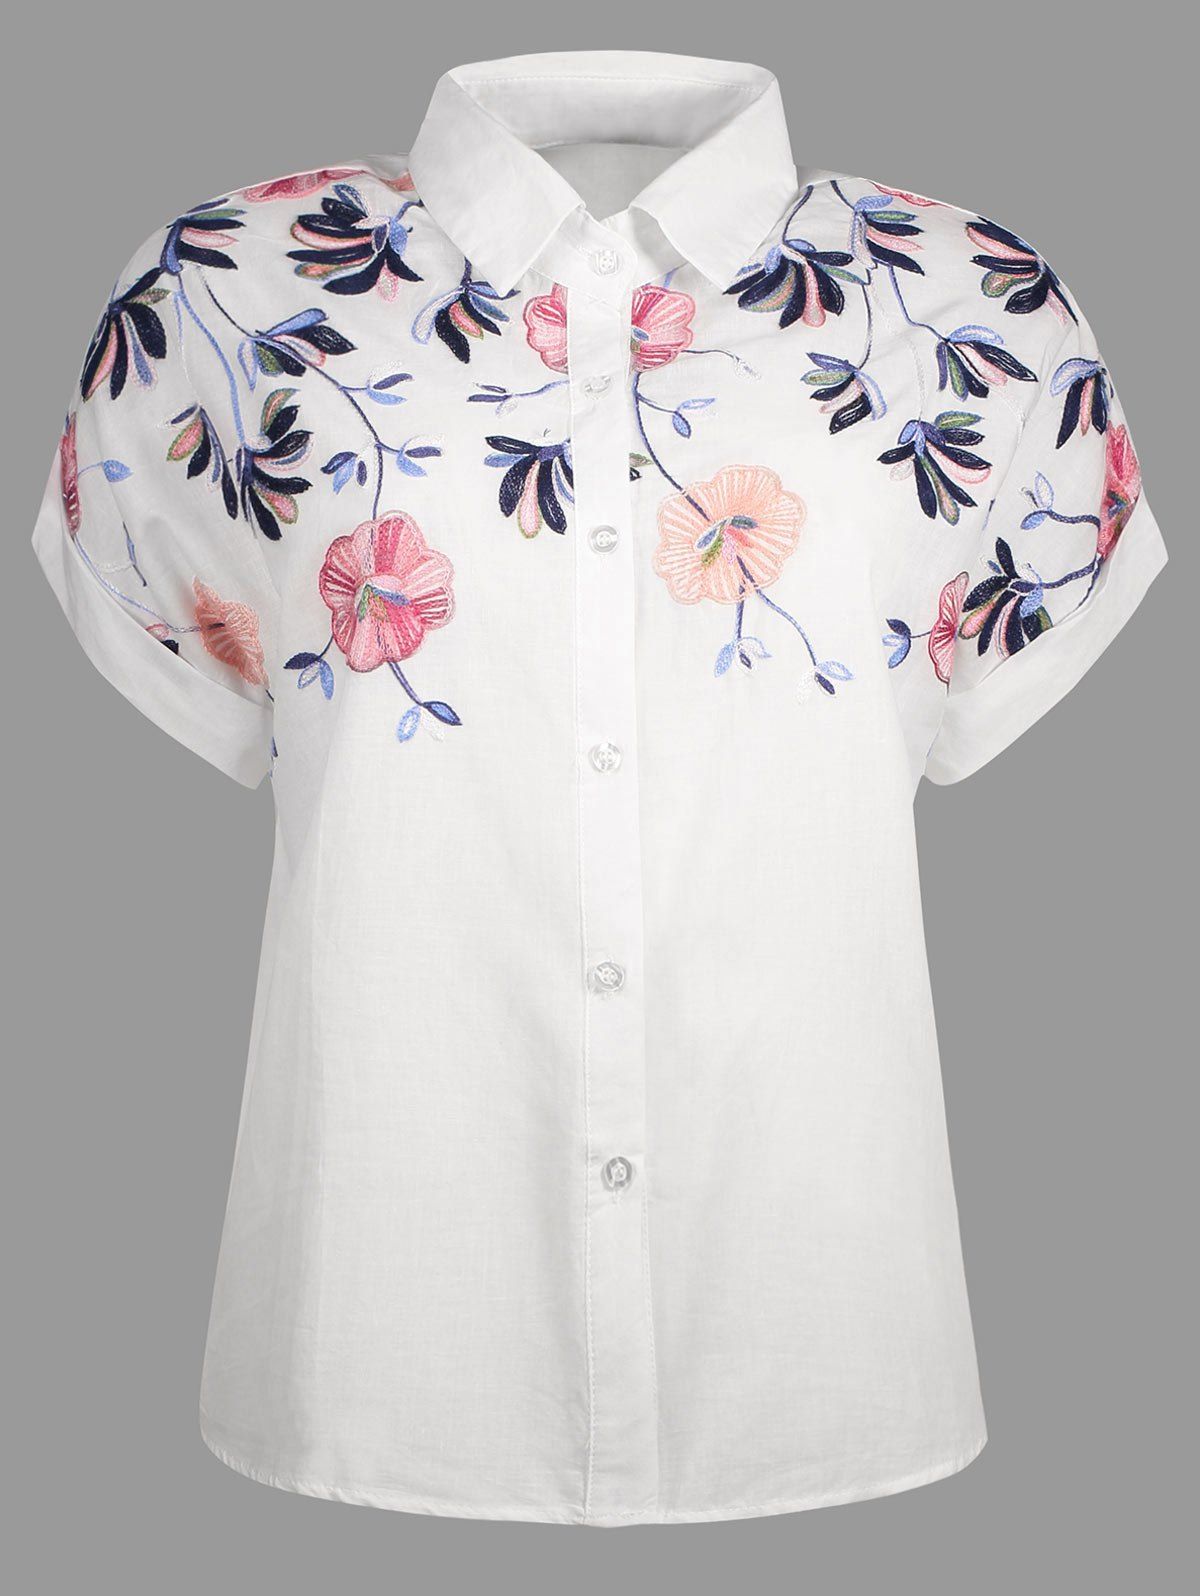 2018 Short Sleeve Button Up Embroidery Shirt In White S | Rosegal.com